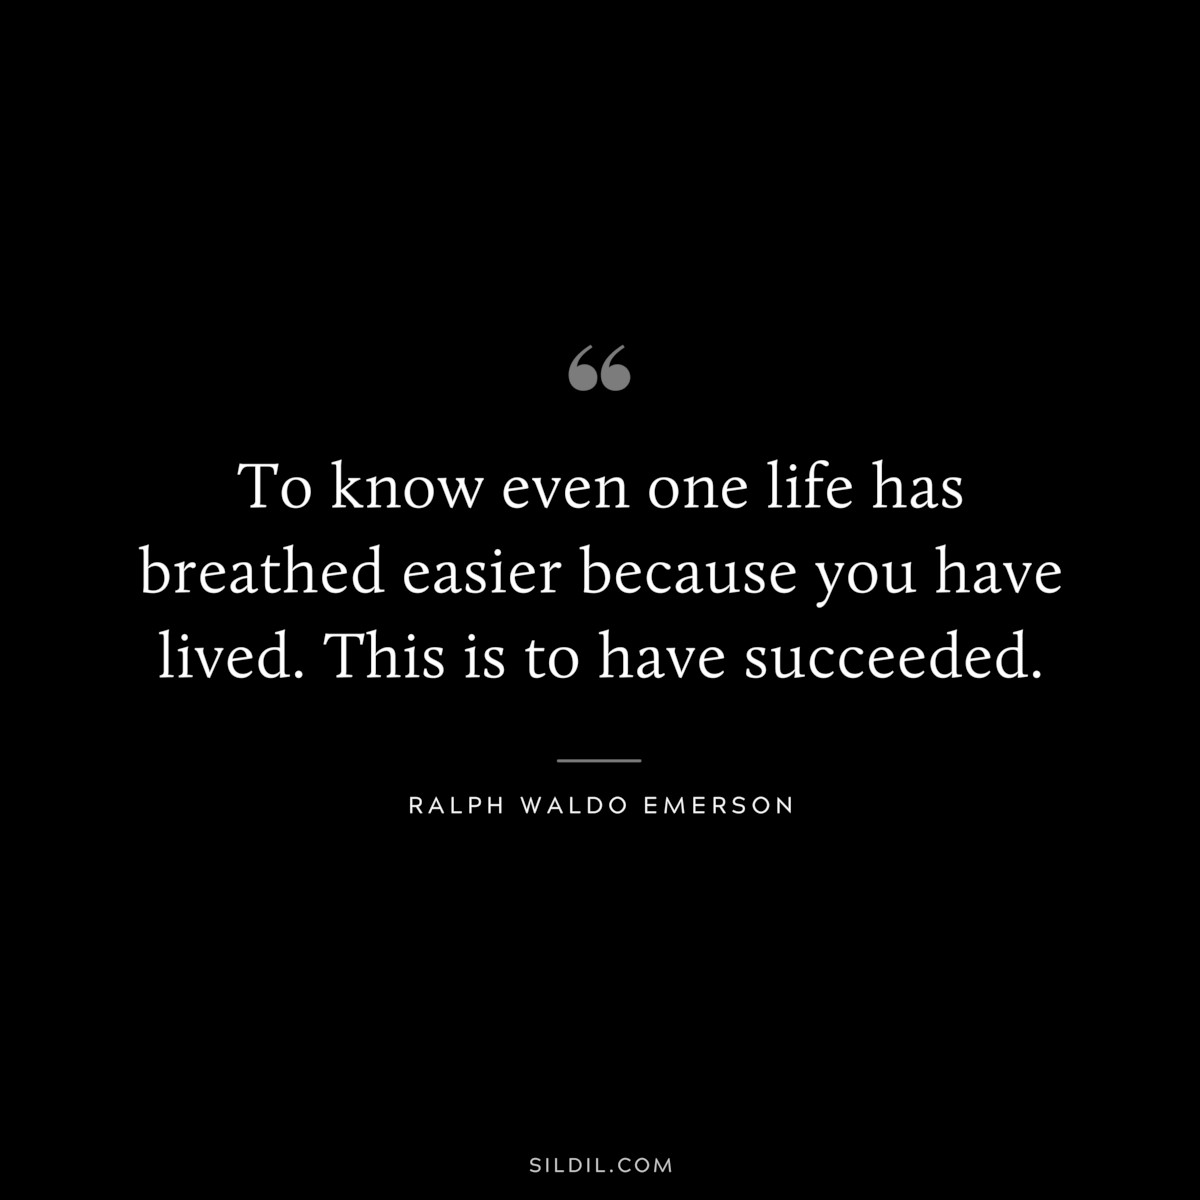 To know even one life has breathed easier because you have lived. This is to have succeeded. — Ralph Waldo Emerson